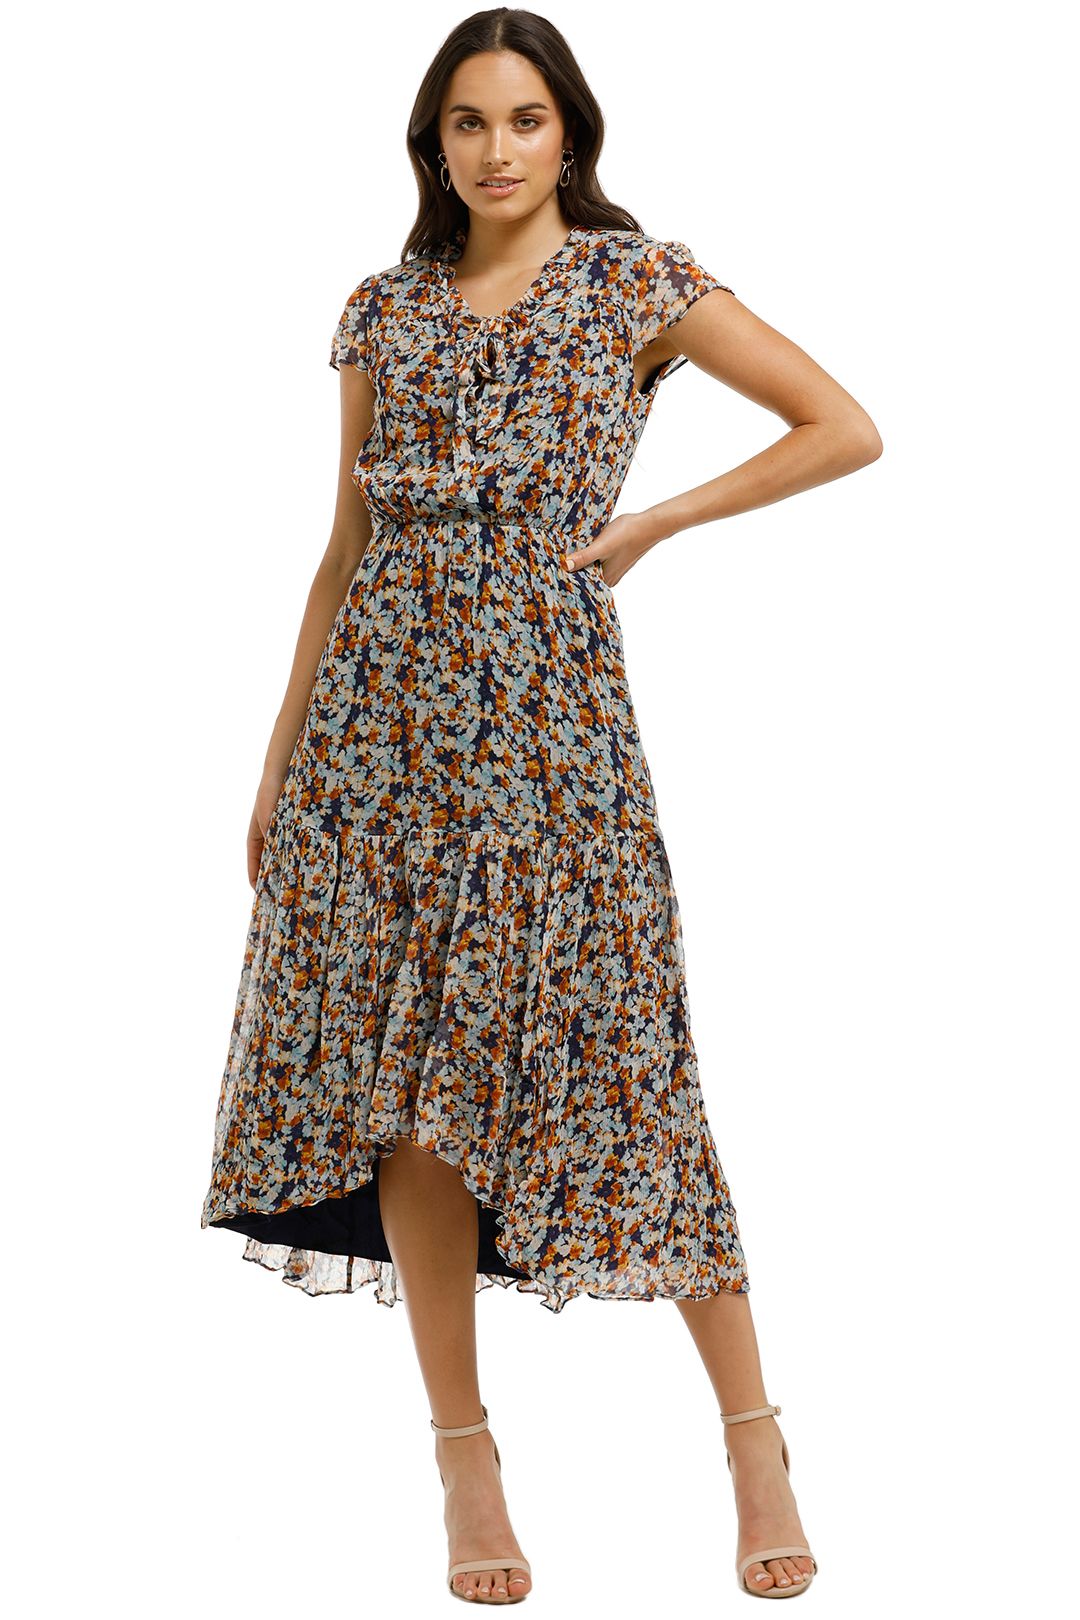 Dixie Midi Dress in Dixie Cup Floral by Stevie May for Rent | GlamCorner